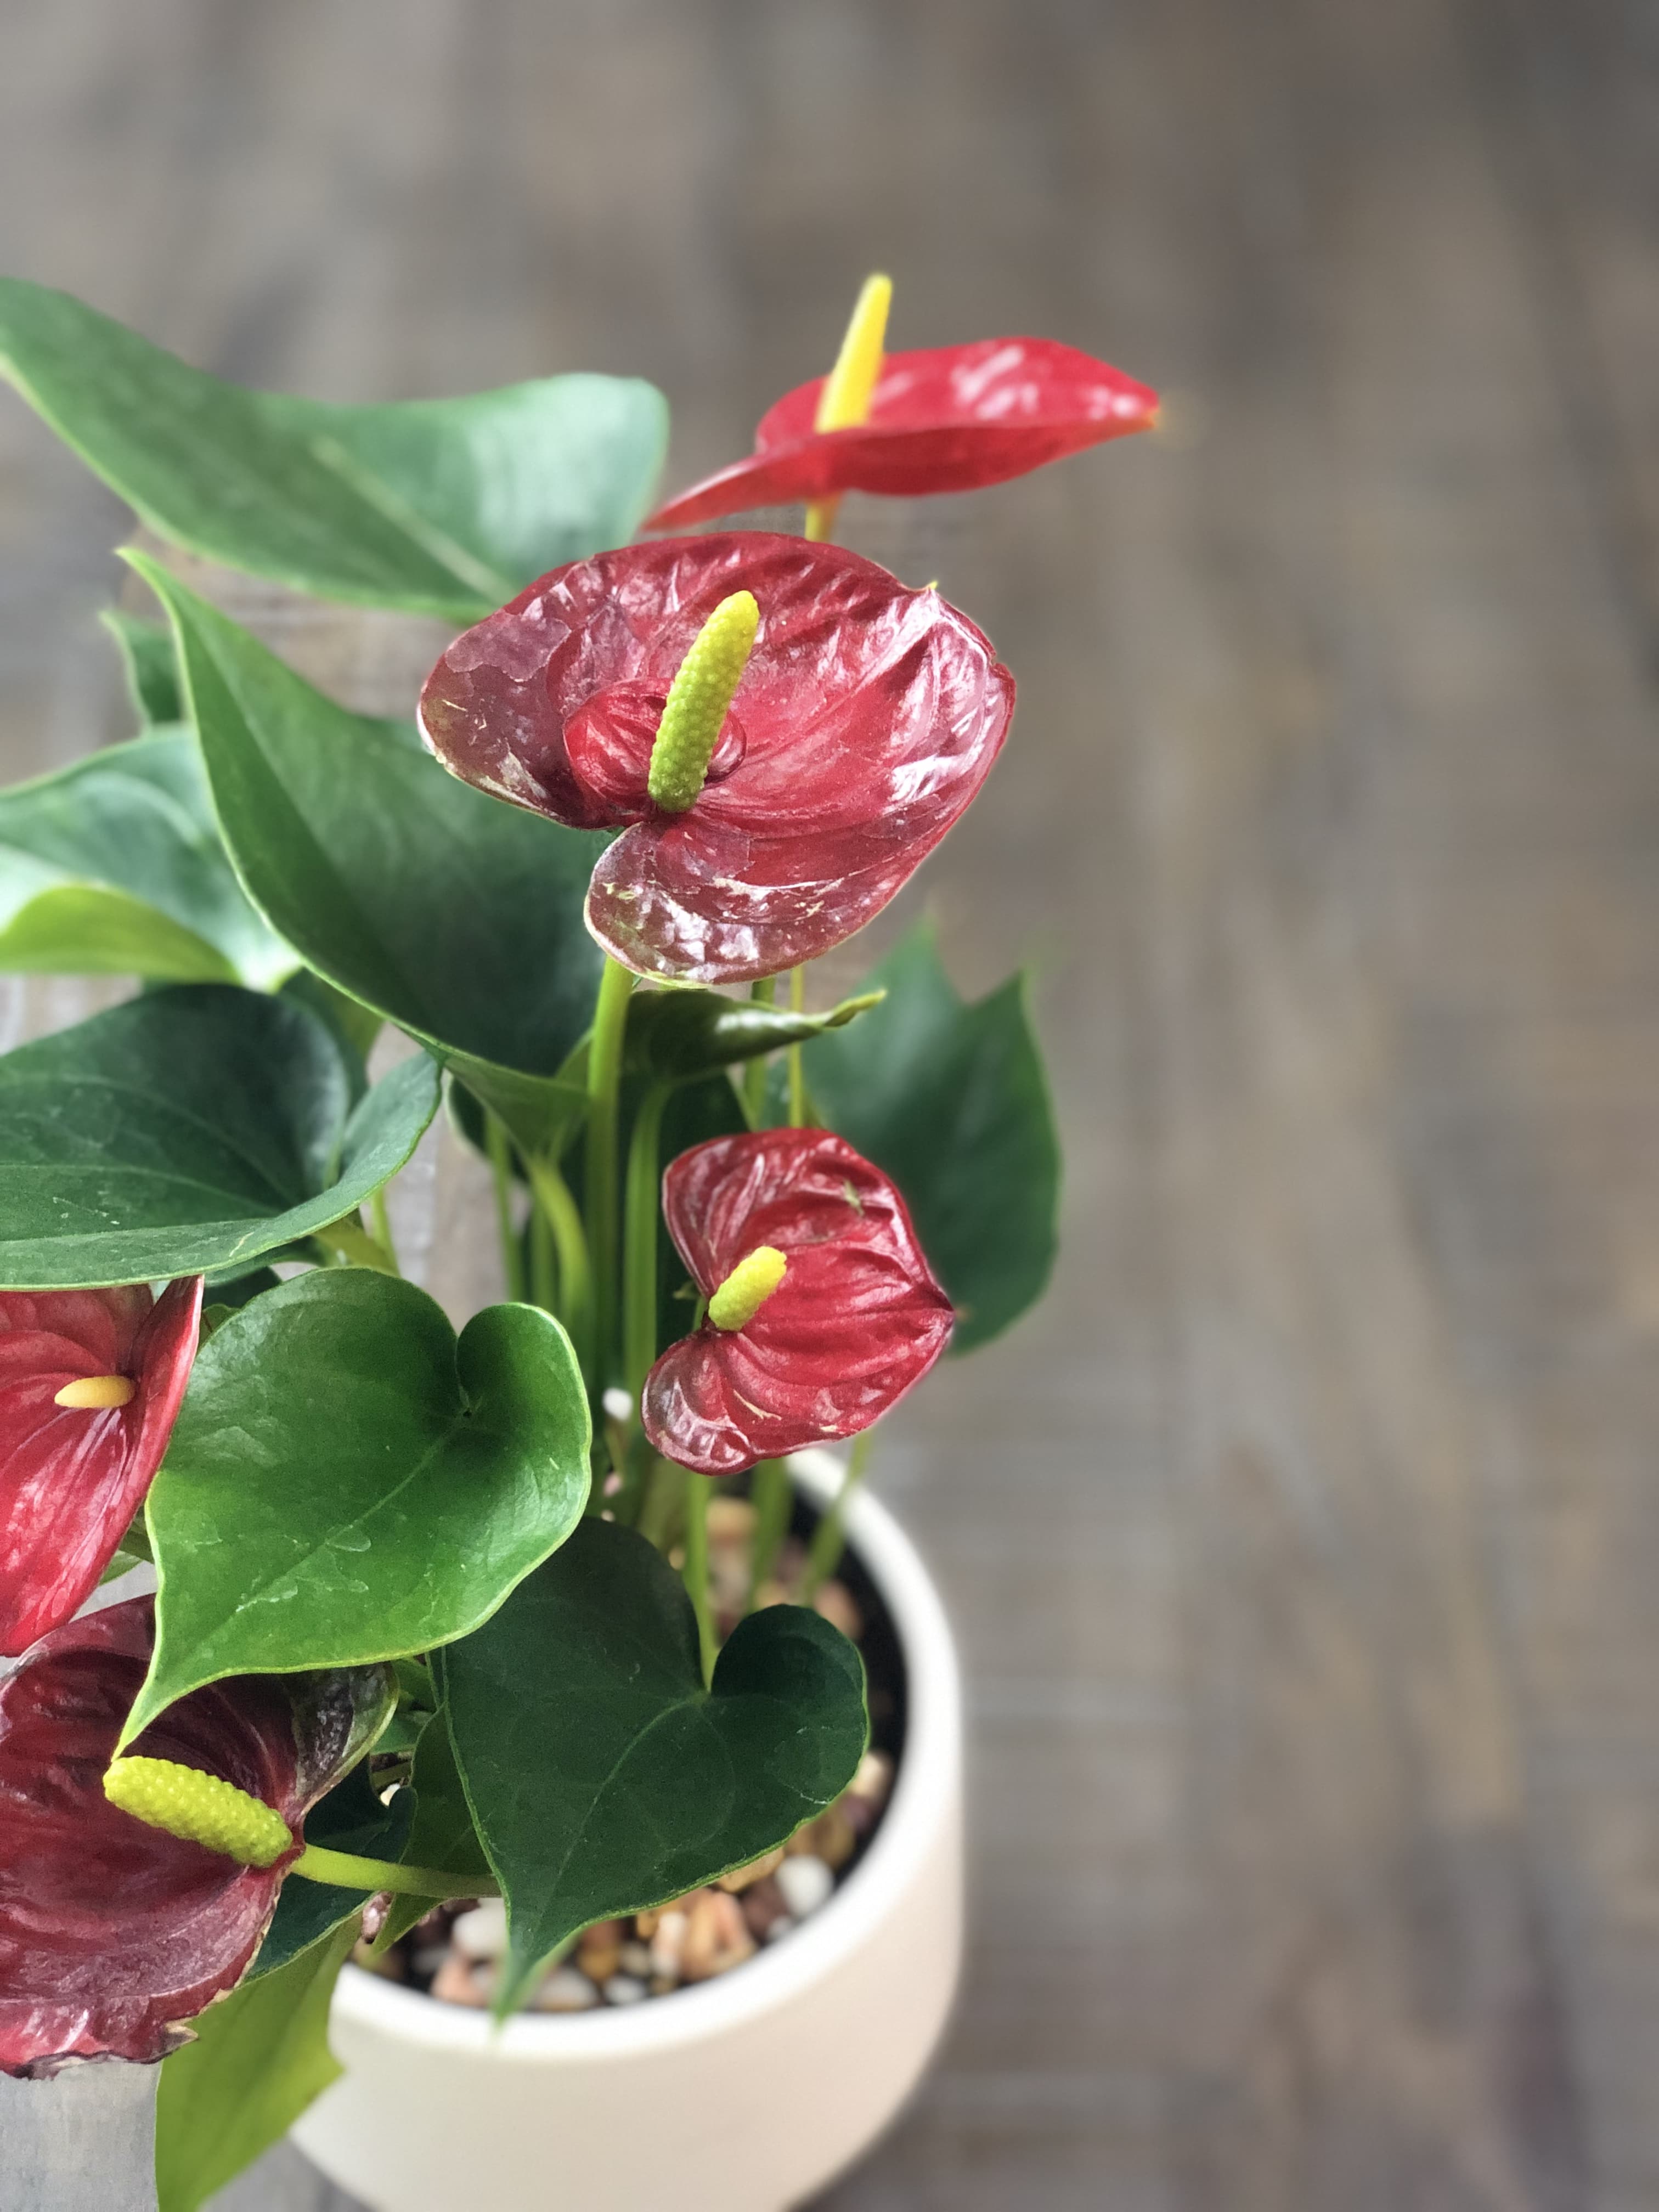 How to Take Care of Anthurium Plants Indoors